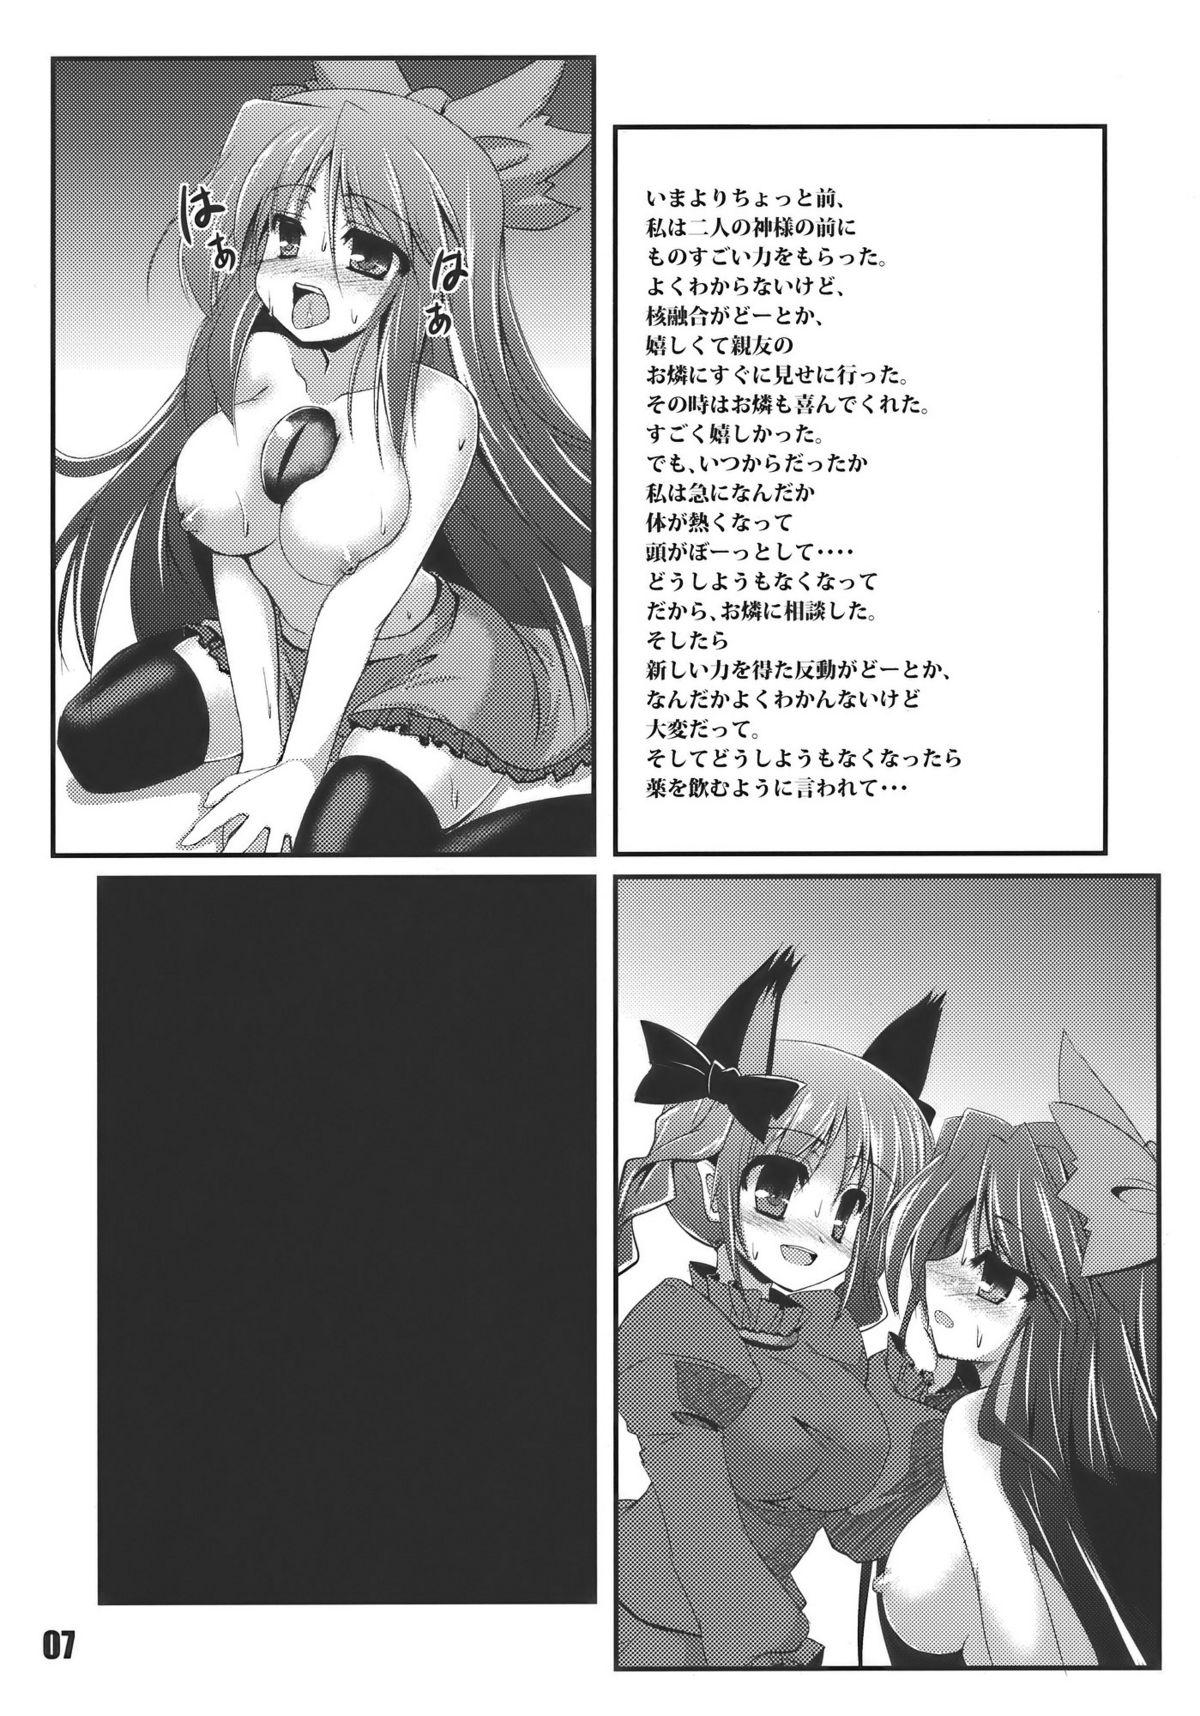 The Febrile Disease - Touhou project Pussy - Page 7